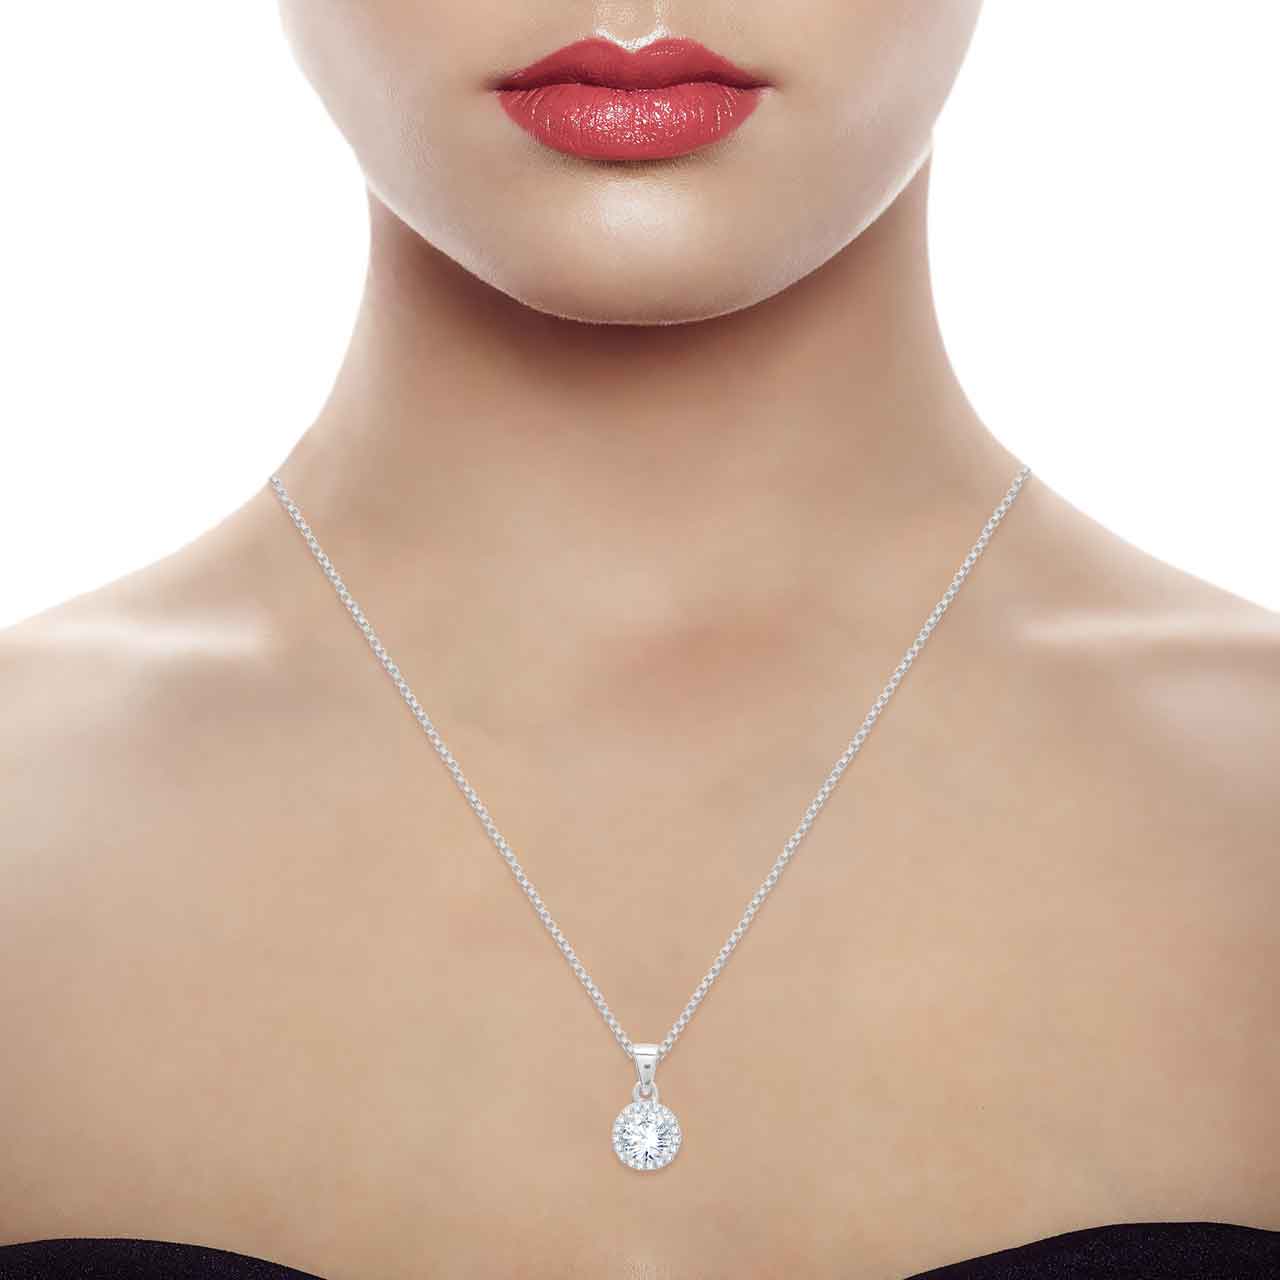 Stunning Silver Solitaire Pendant